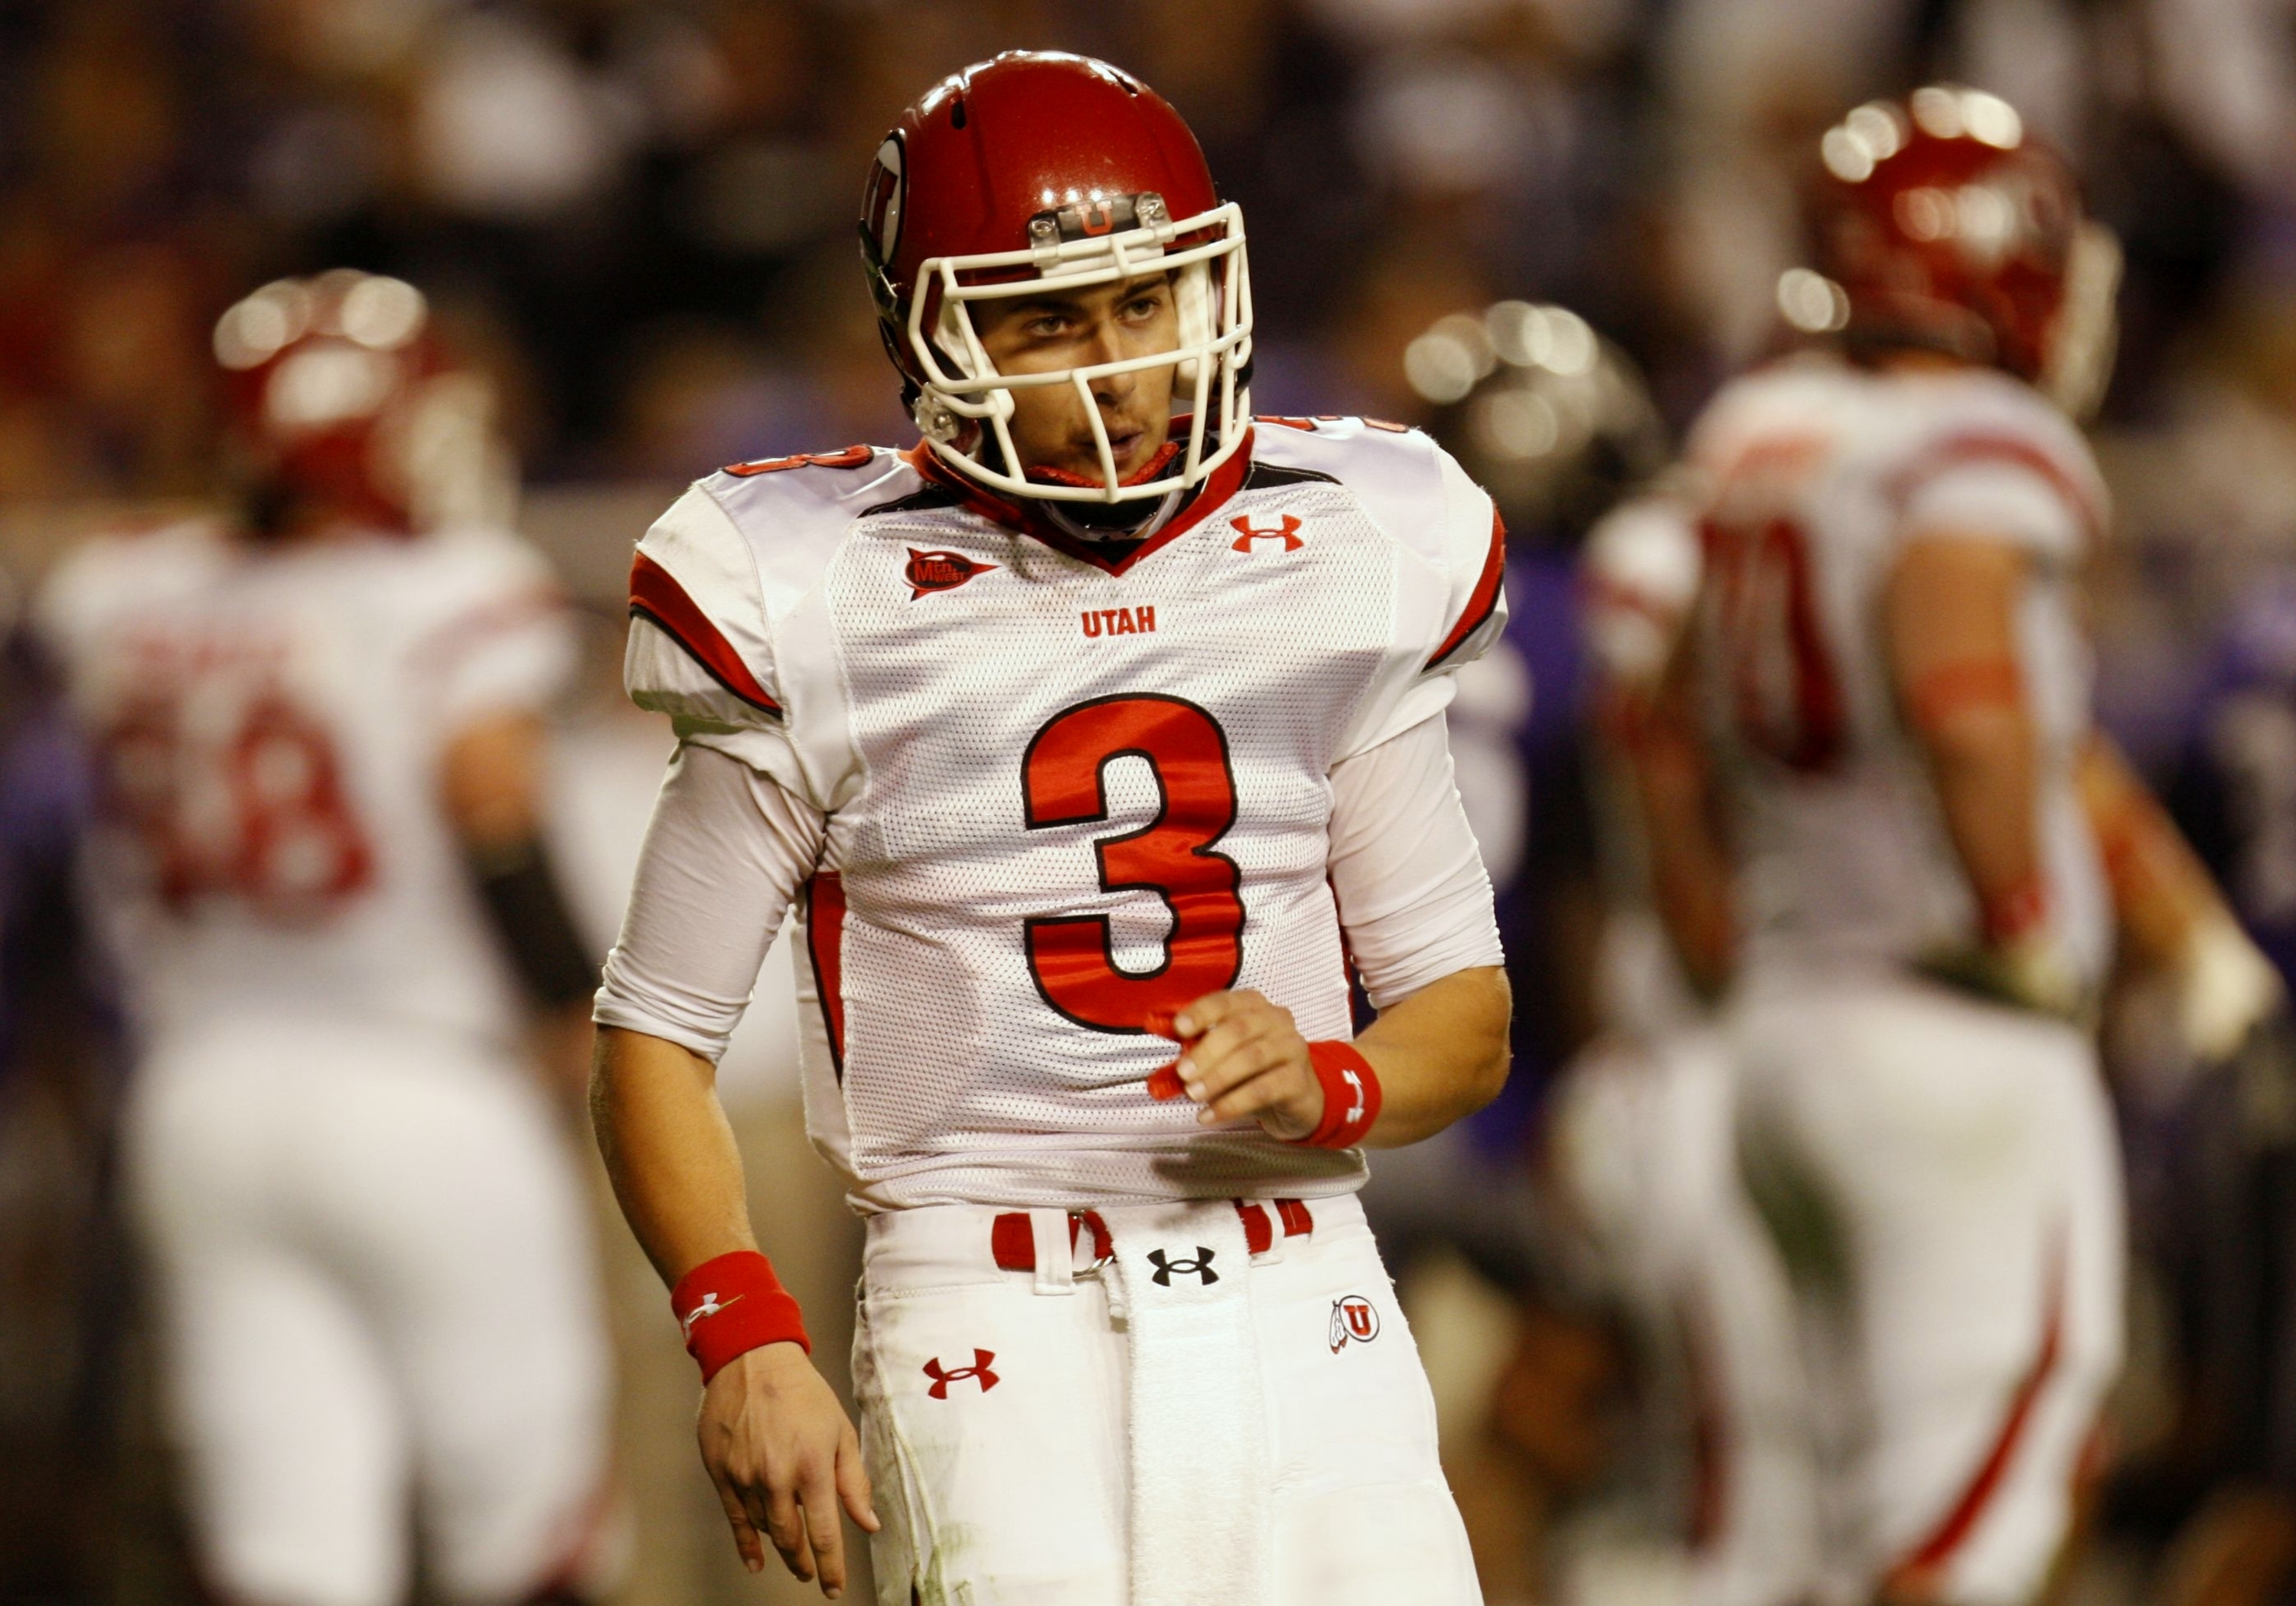 FORT WORTH, TX - NOVEMBER 14:  Quarterback Jordan Wynn #3 of the Utah Utes reacts in the second quarter of the game against the TCU Horned Frogs at Amon G. Carter Stadium on November 14, 2009 in Fort Worth, Texas.  (Photo by Ronald Martinez/Getty Images)